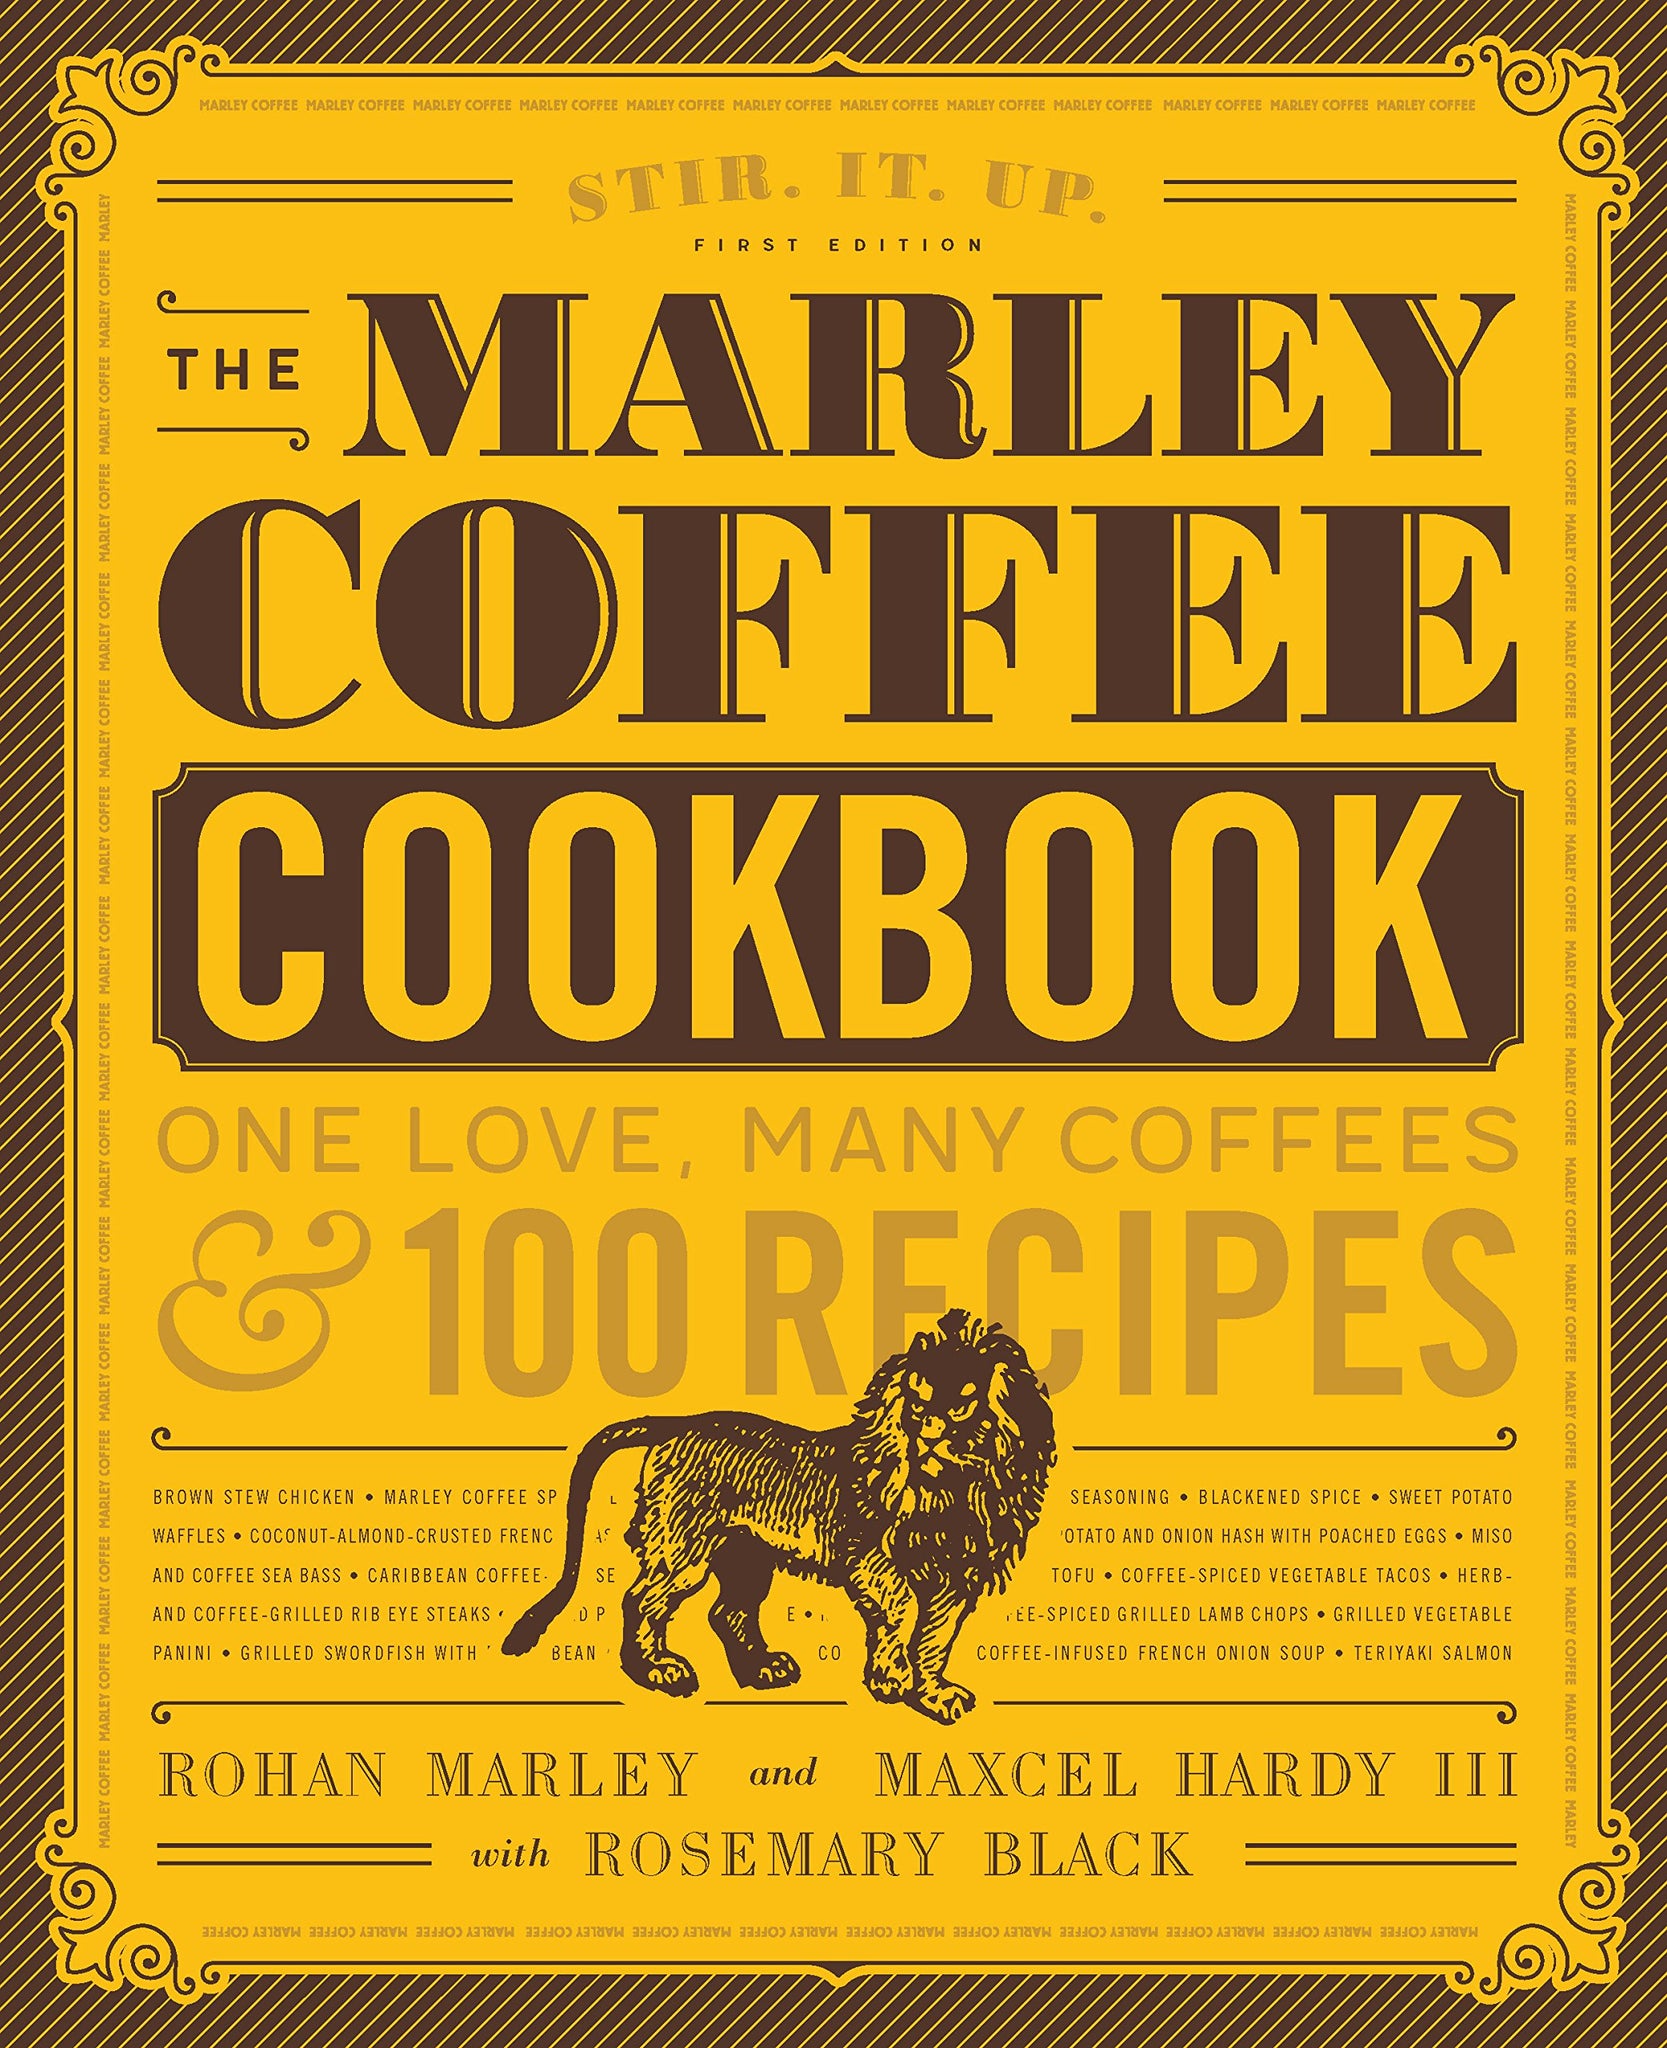 The Marley Coffee Cookbook (Hardcover)